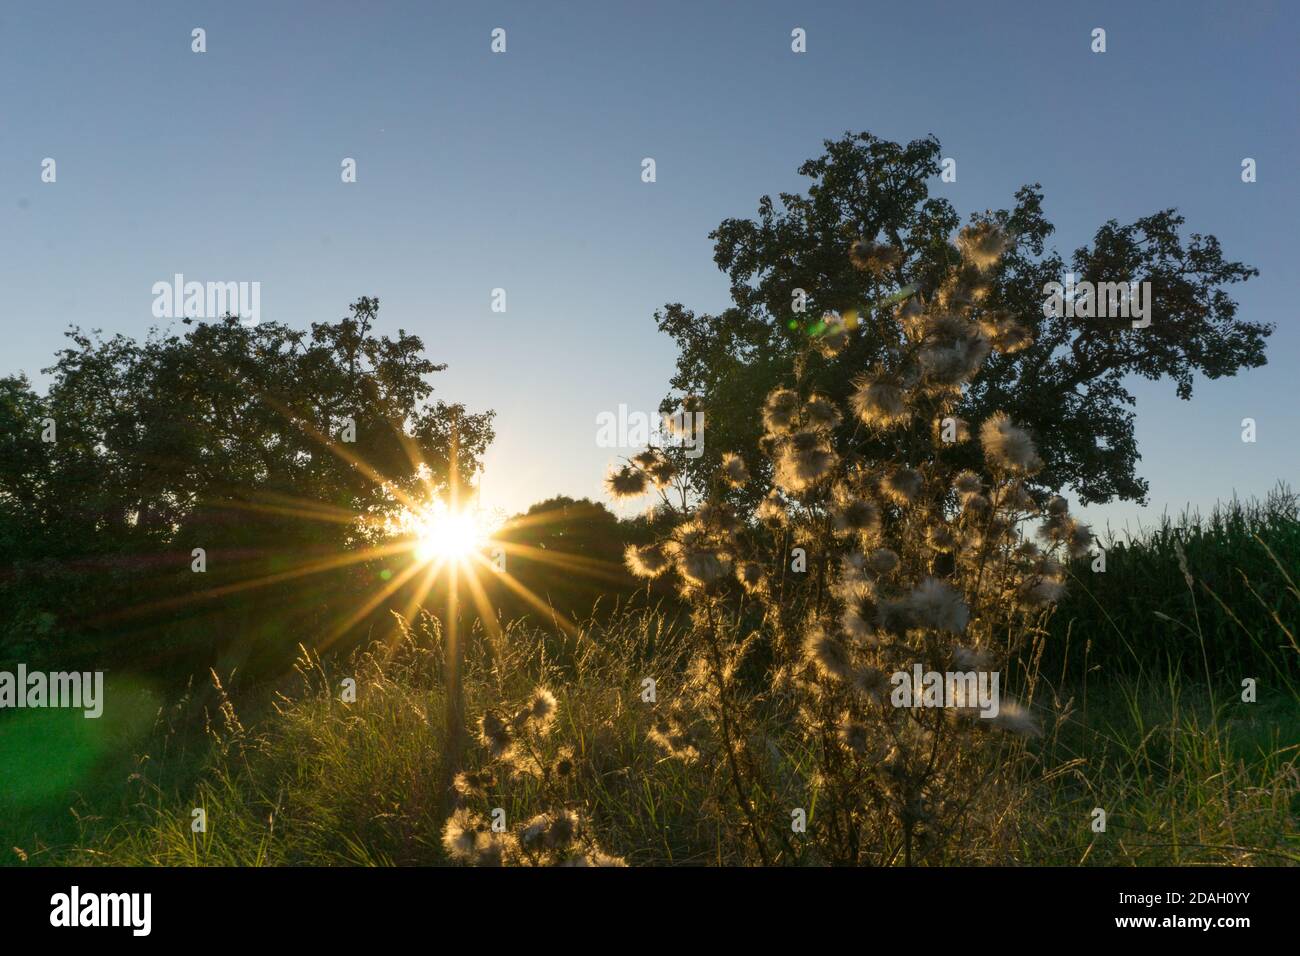 rural scene with sun star at golden hour on meadow with trees Stock Photo